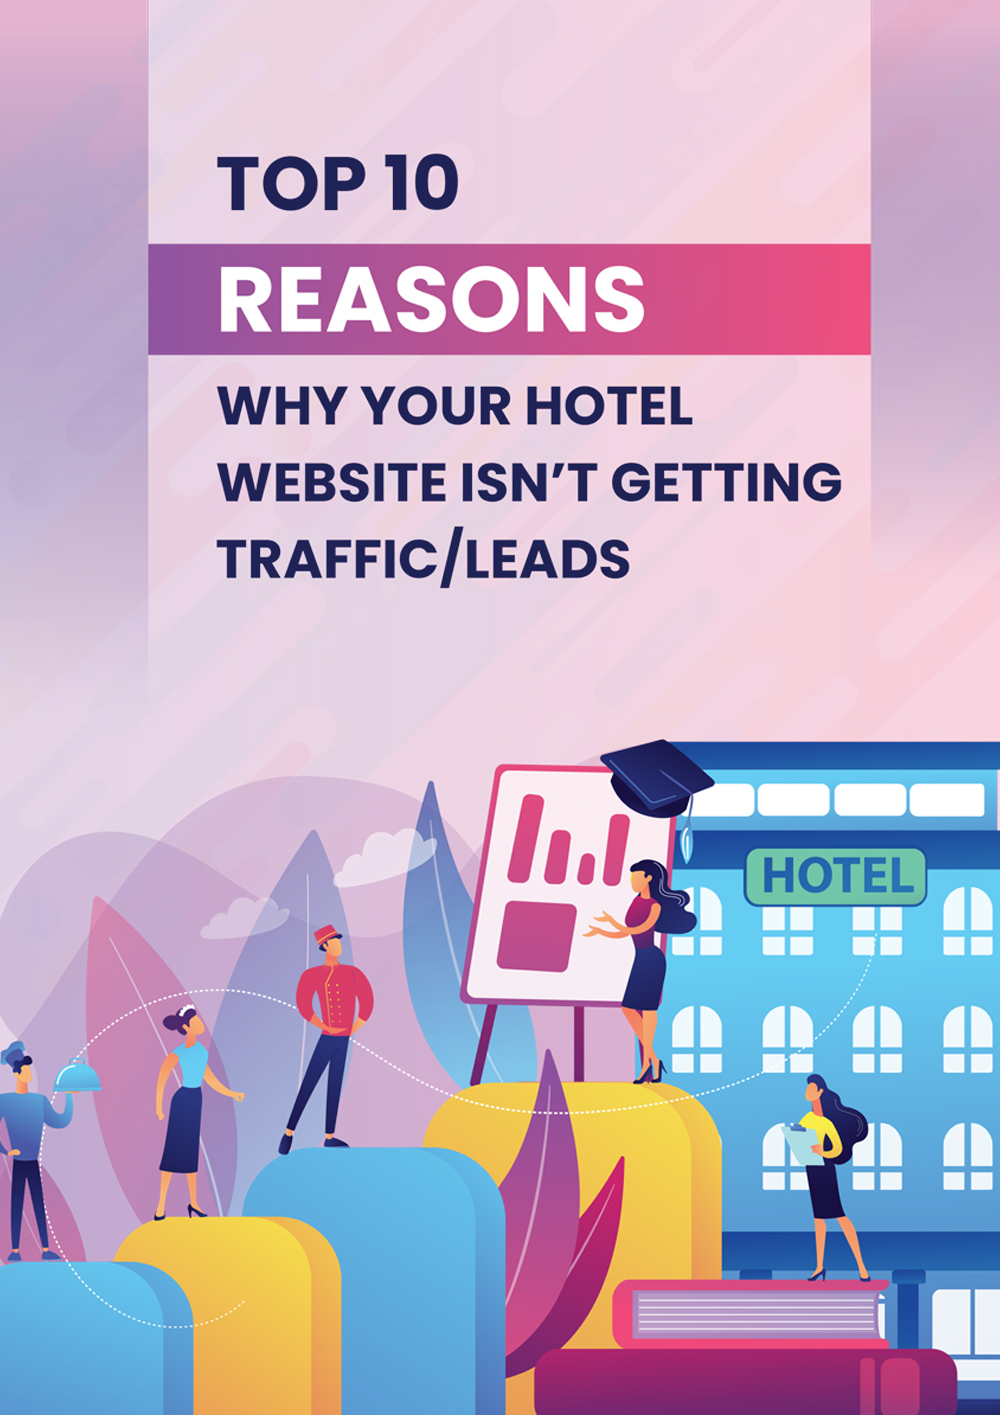 Top 10 Reasons Why Your Hotel Website Isn’t Getting Traffic/Leads